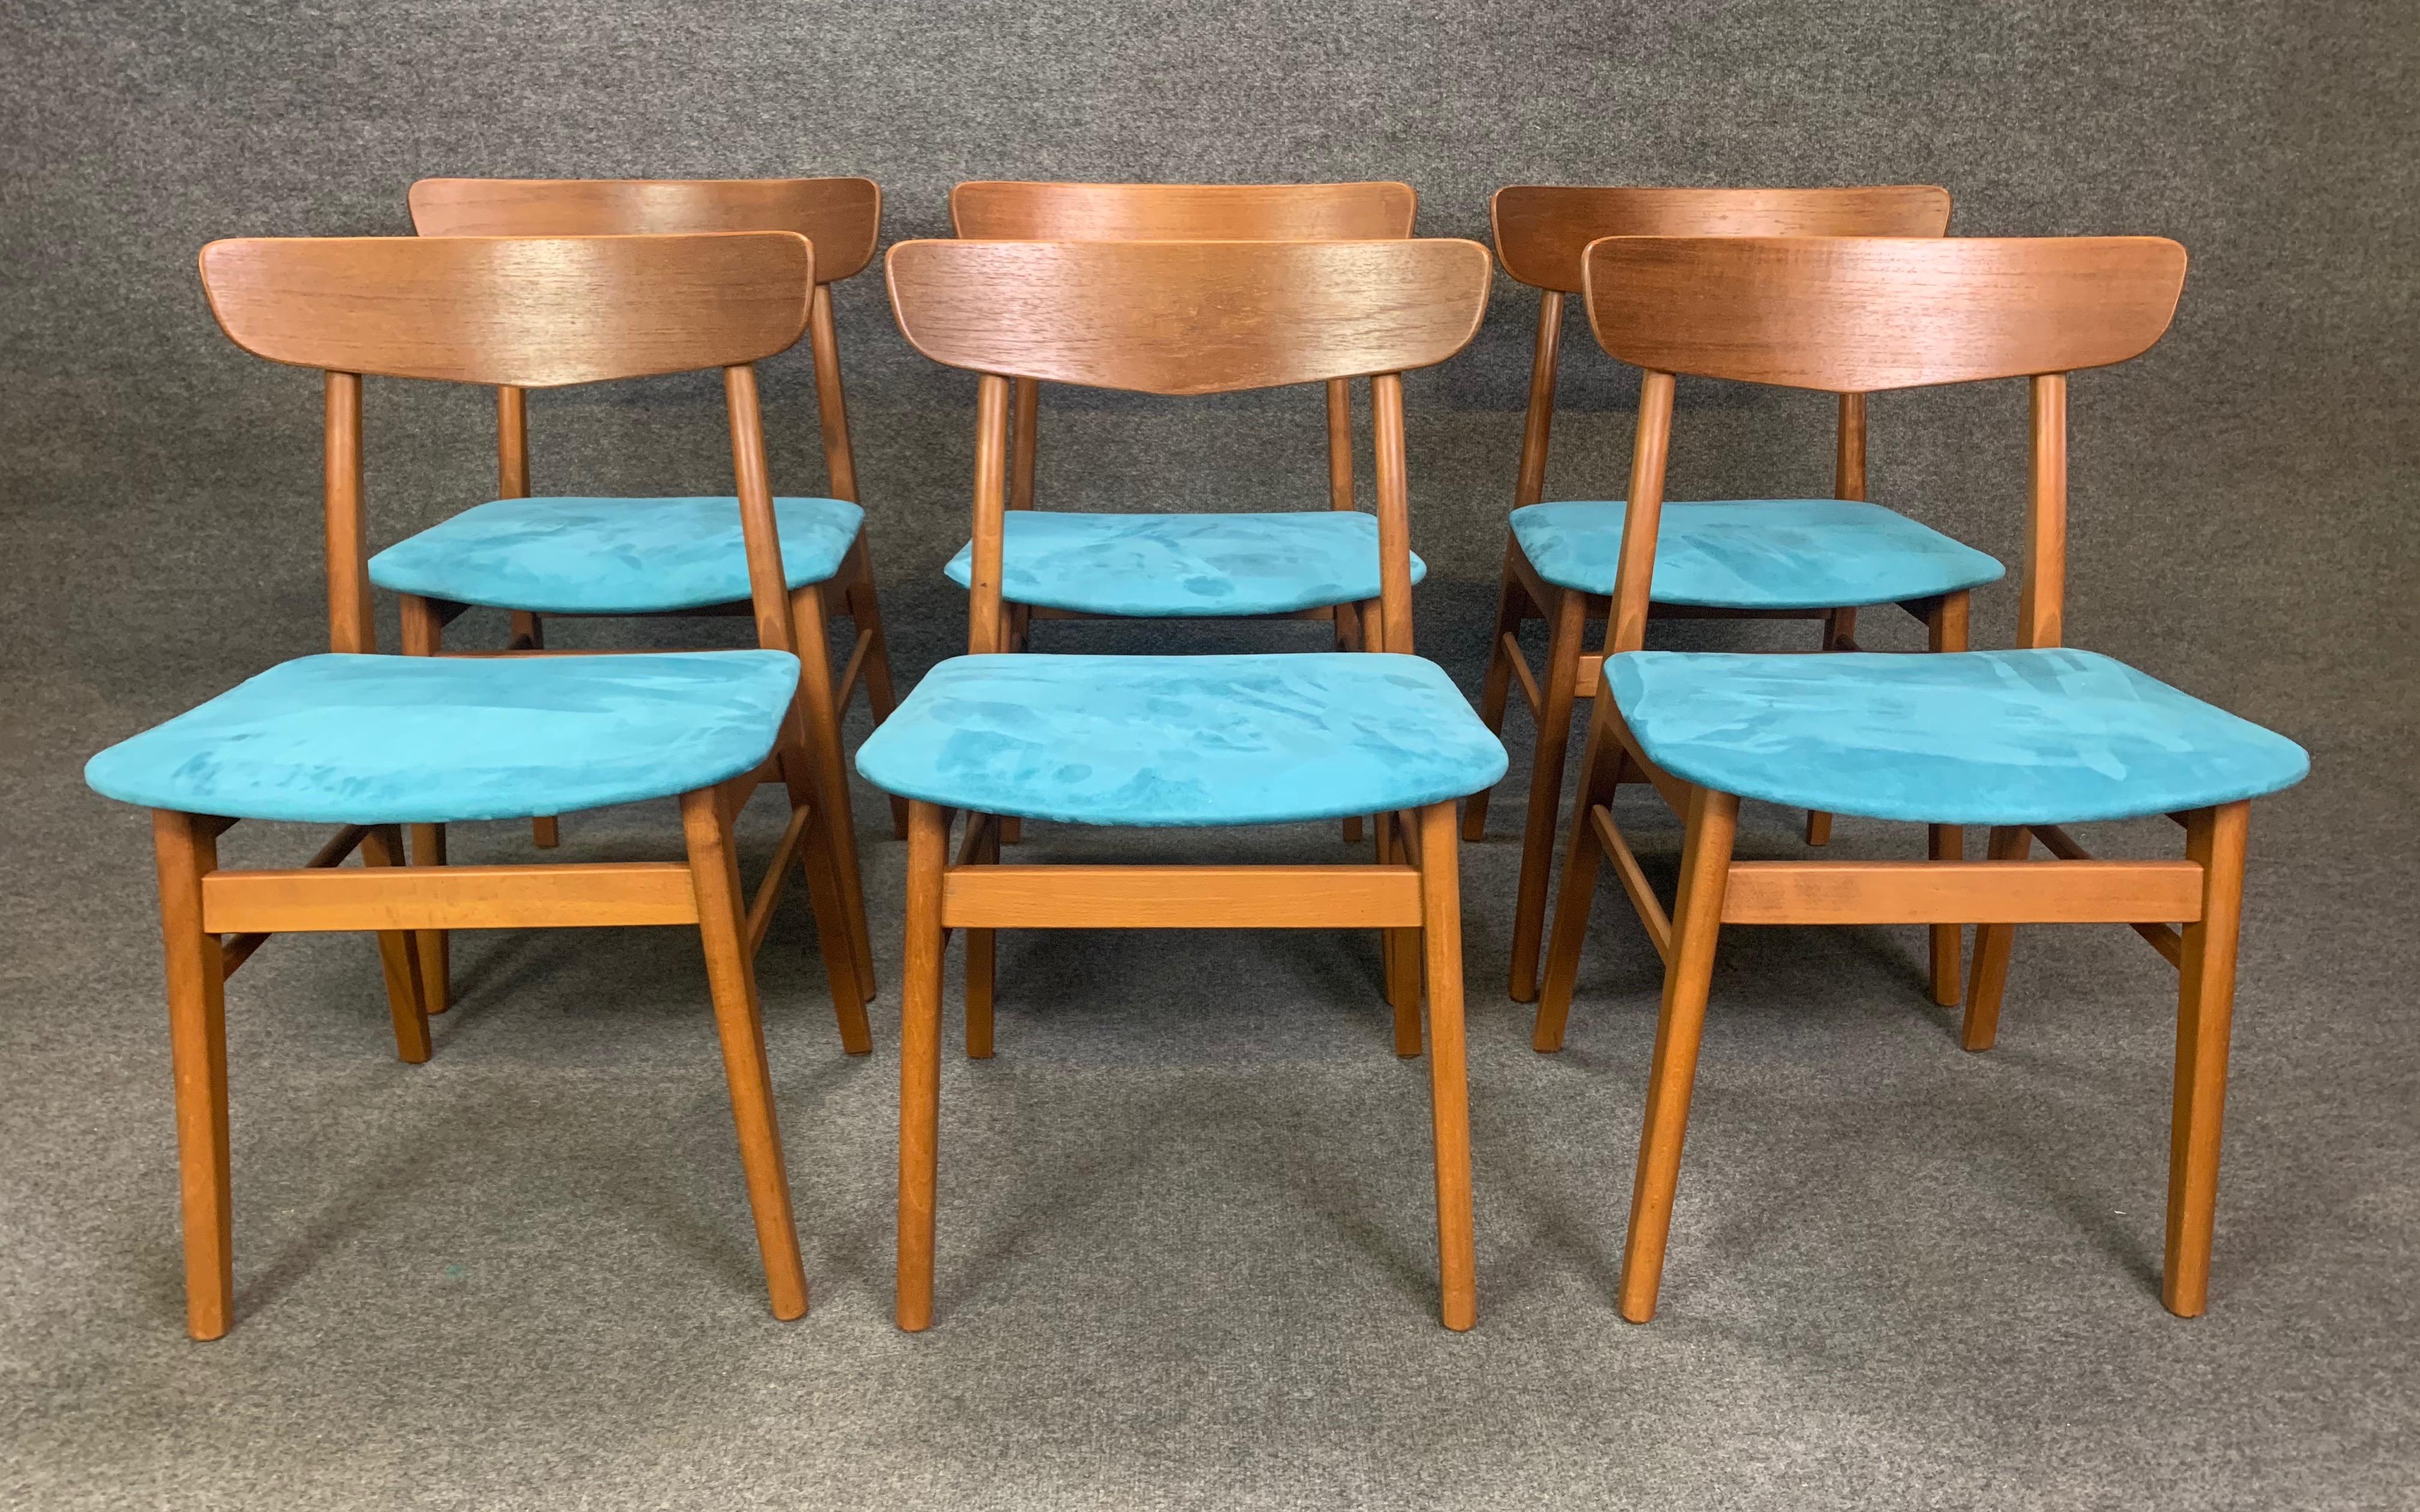 Woodwork Set of Six Vintage Midcentury Danish Modern Teak Dining Chairs by Findhahls For Sale